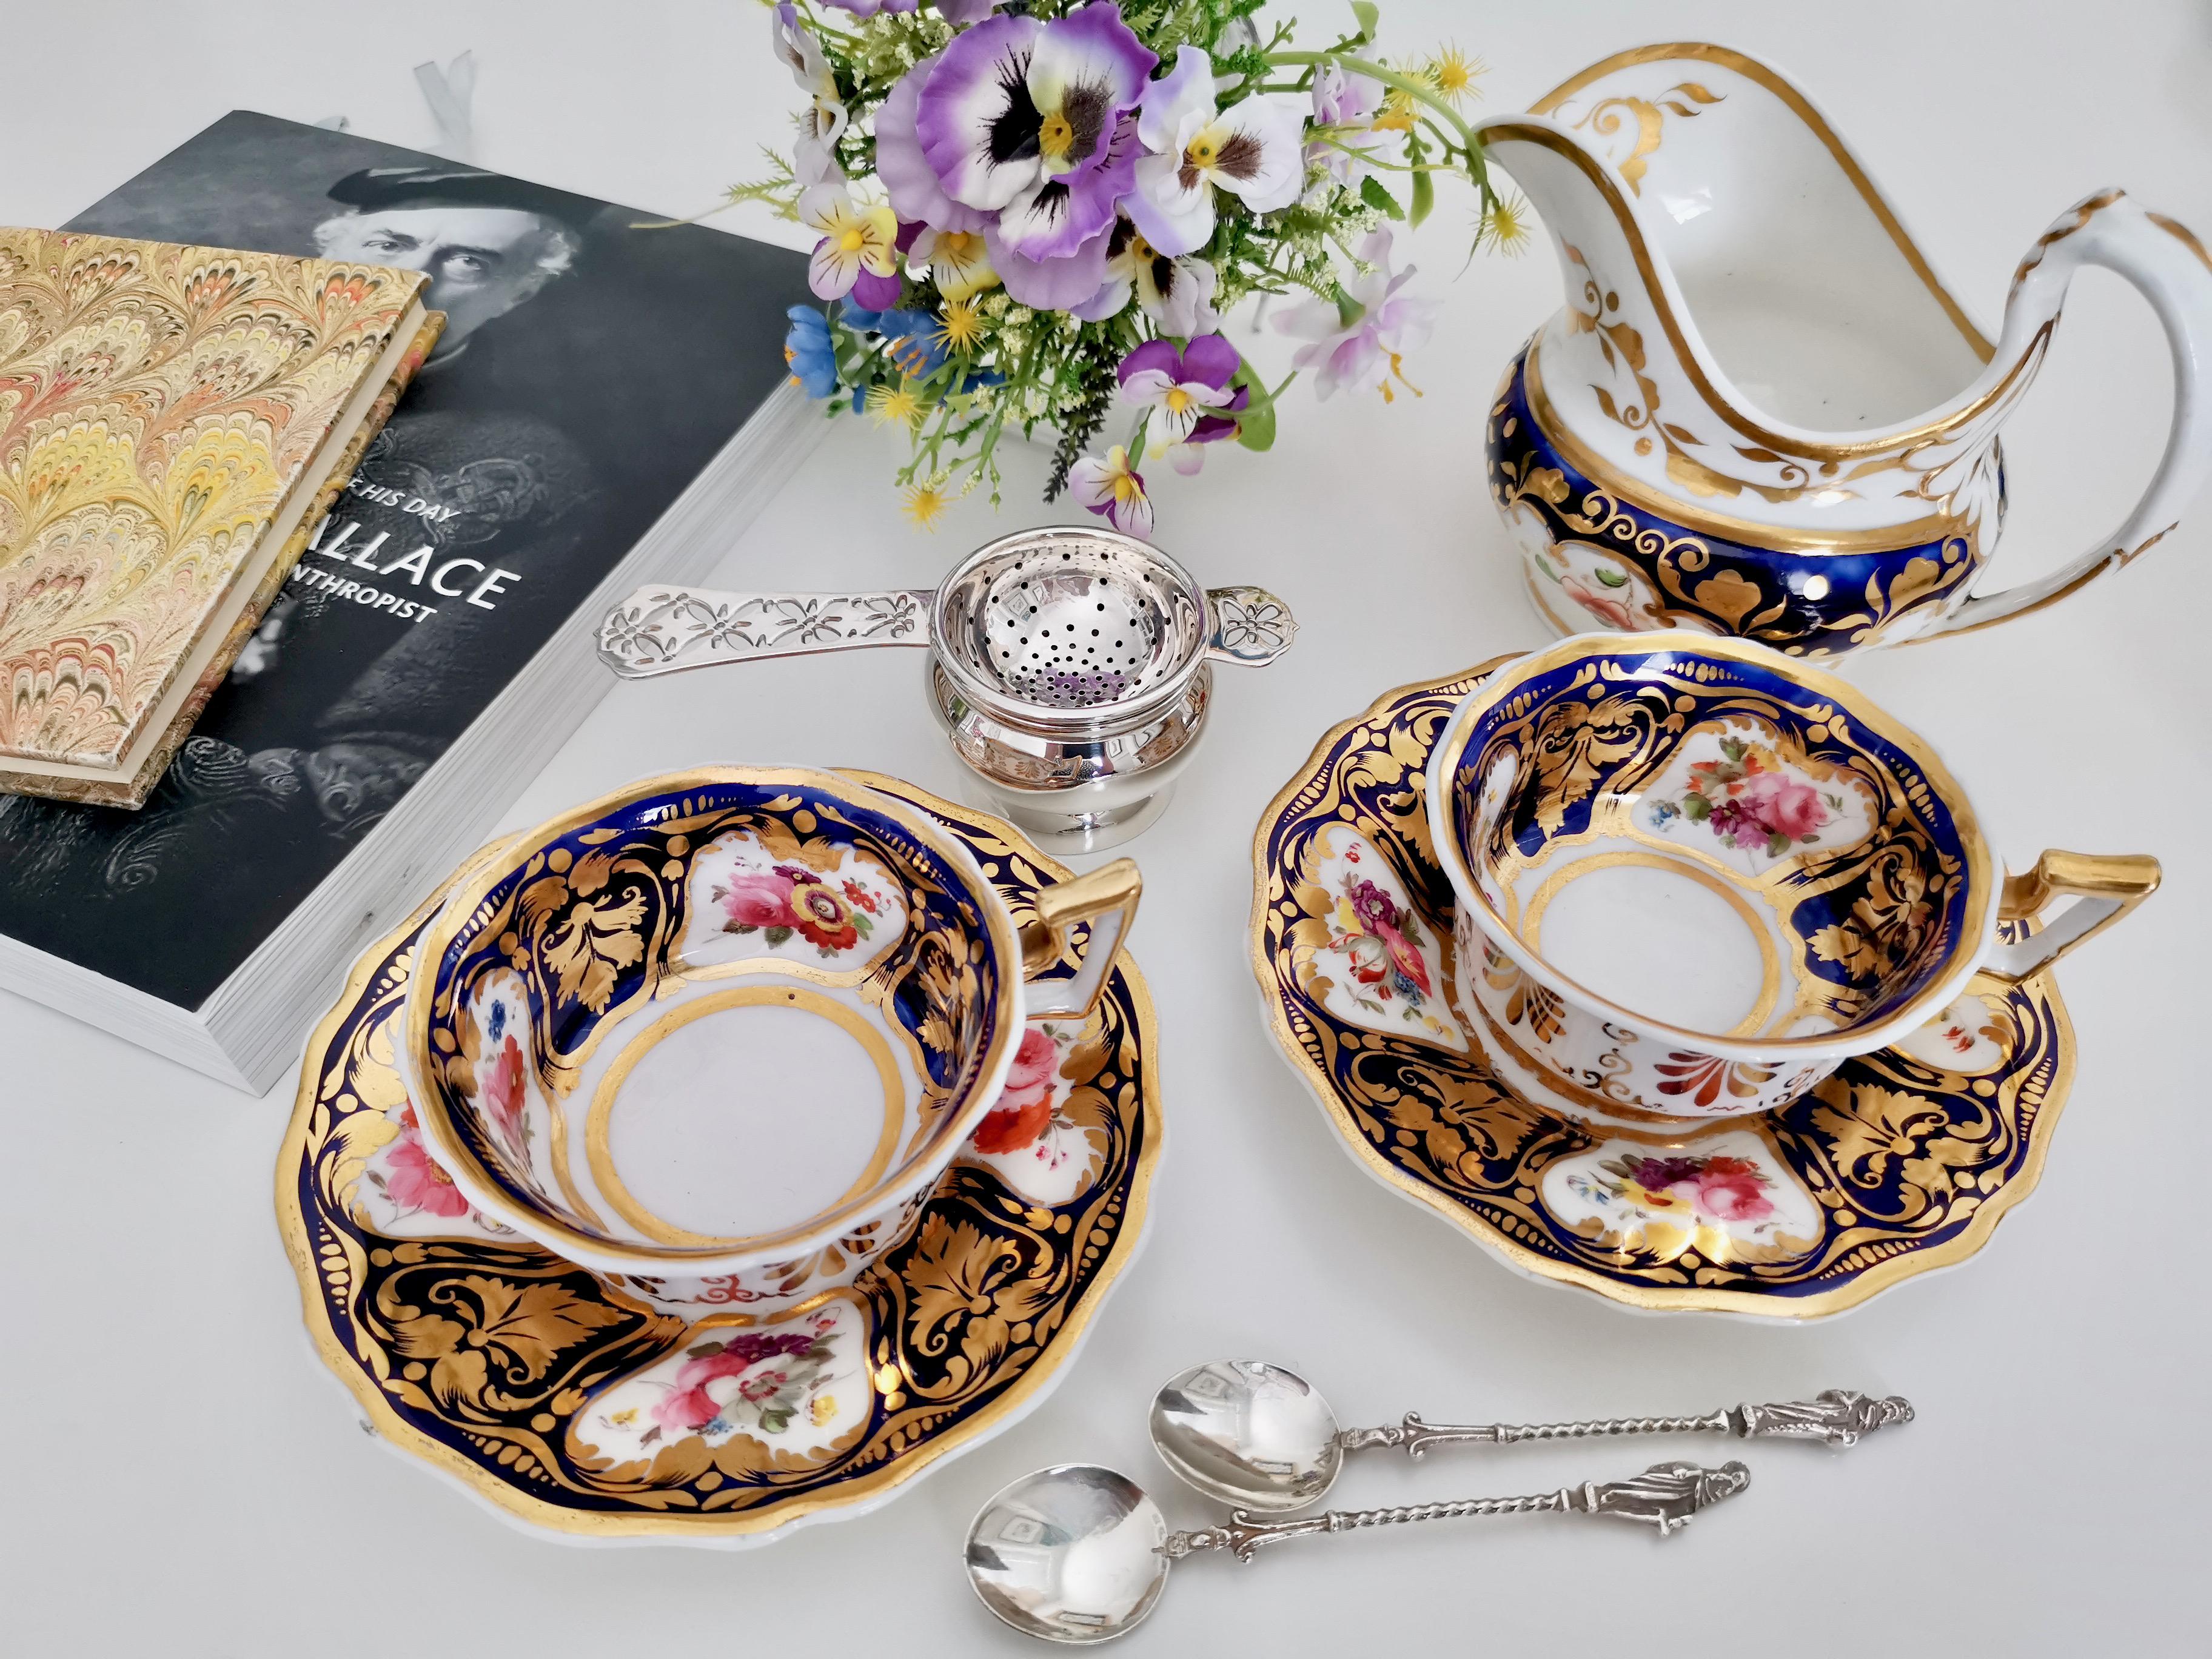 This is beautiful teacup and saucer made around 1825 by Ridgway. The set is decorated in a cobalt blue ground with dramatic gilt acanthus details and beautiful hand painted flowers. The shape is typical for its time and Ridgway called it the 